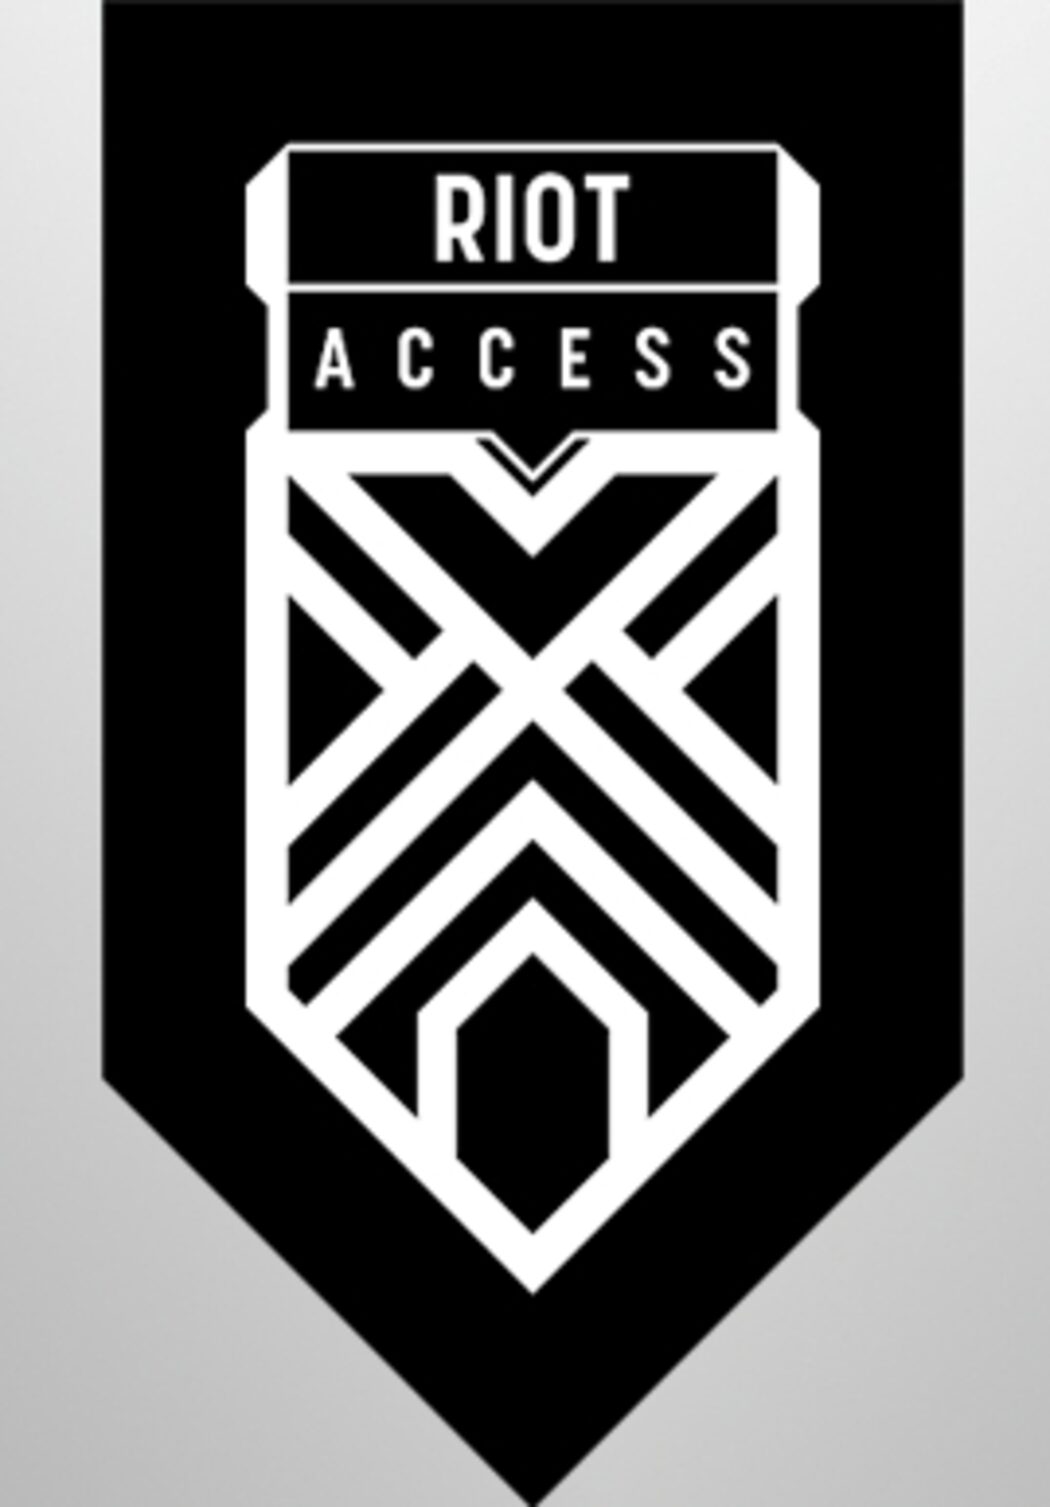 Riot Access Code $5 (Latam America) - Email Delivery